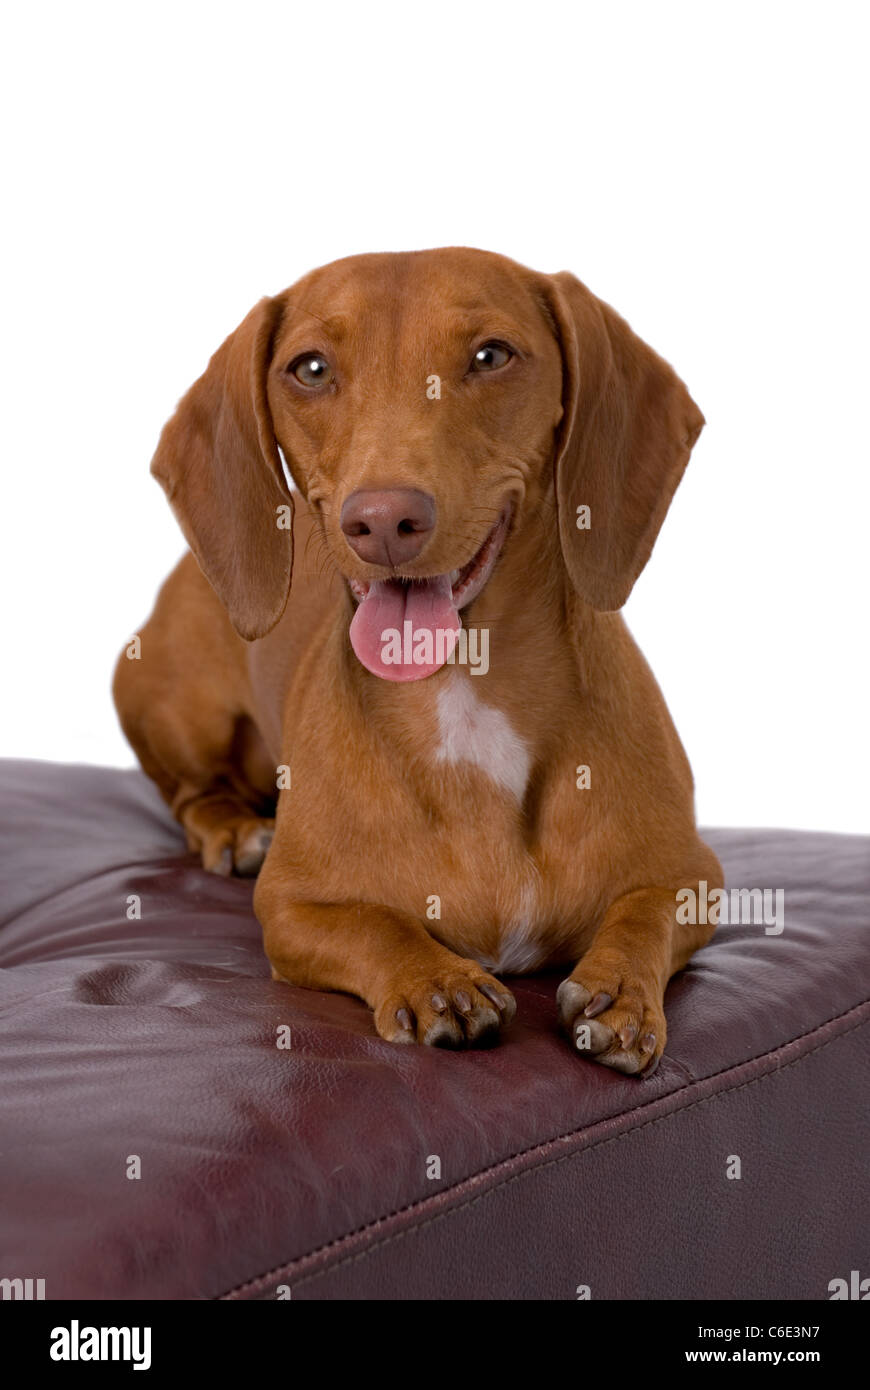 Sweet red Dachshund resting on a burgundy leather chair against a 255 white background. Stock Photo